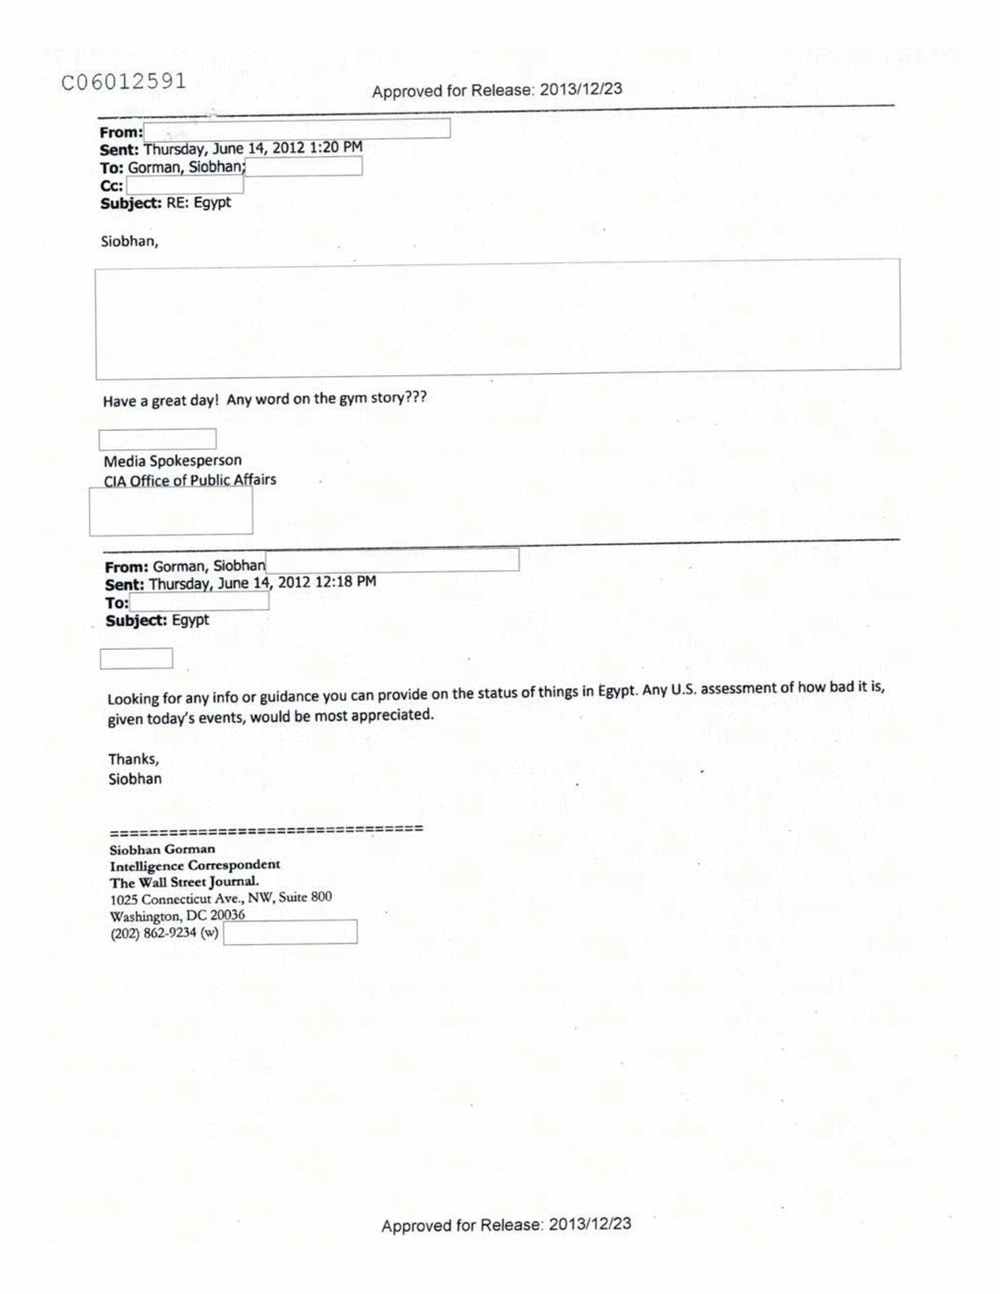 Page 147 from Email Correspondence Between Reporters and CIA Flacks